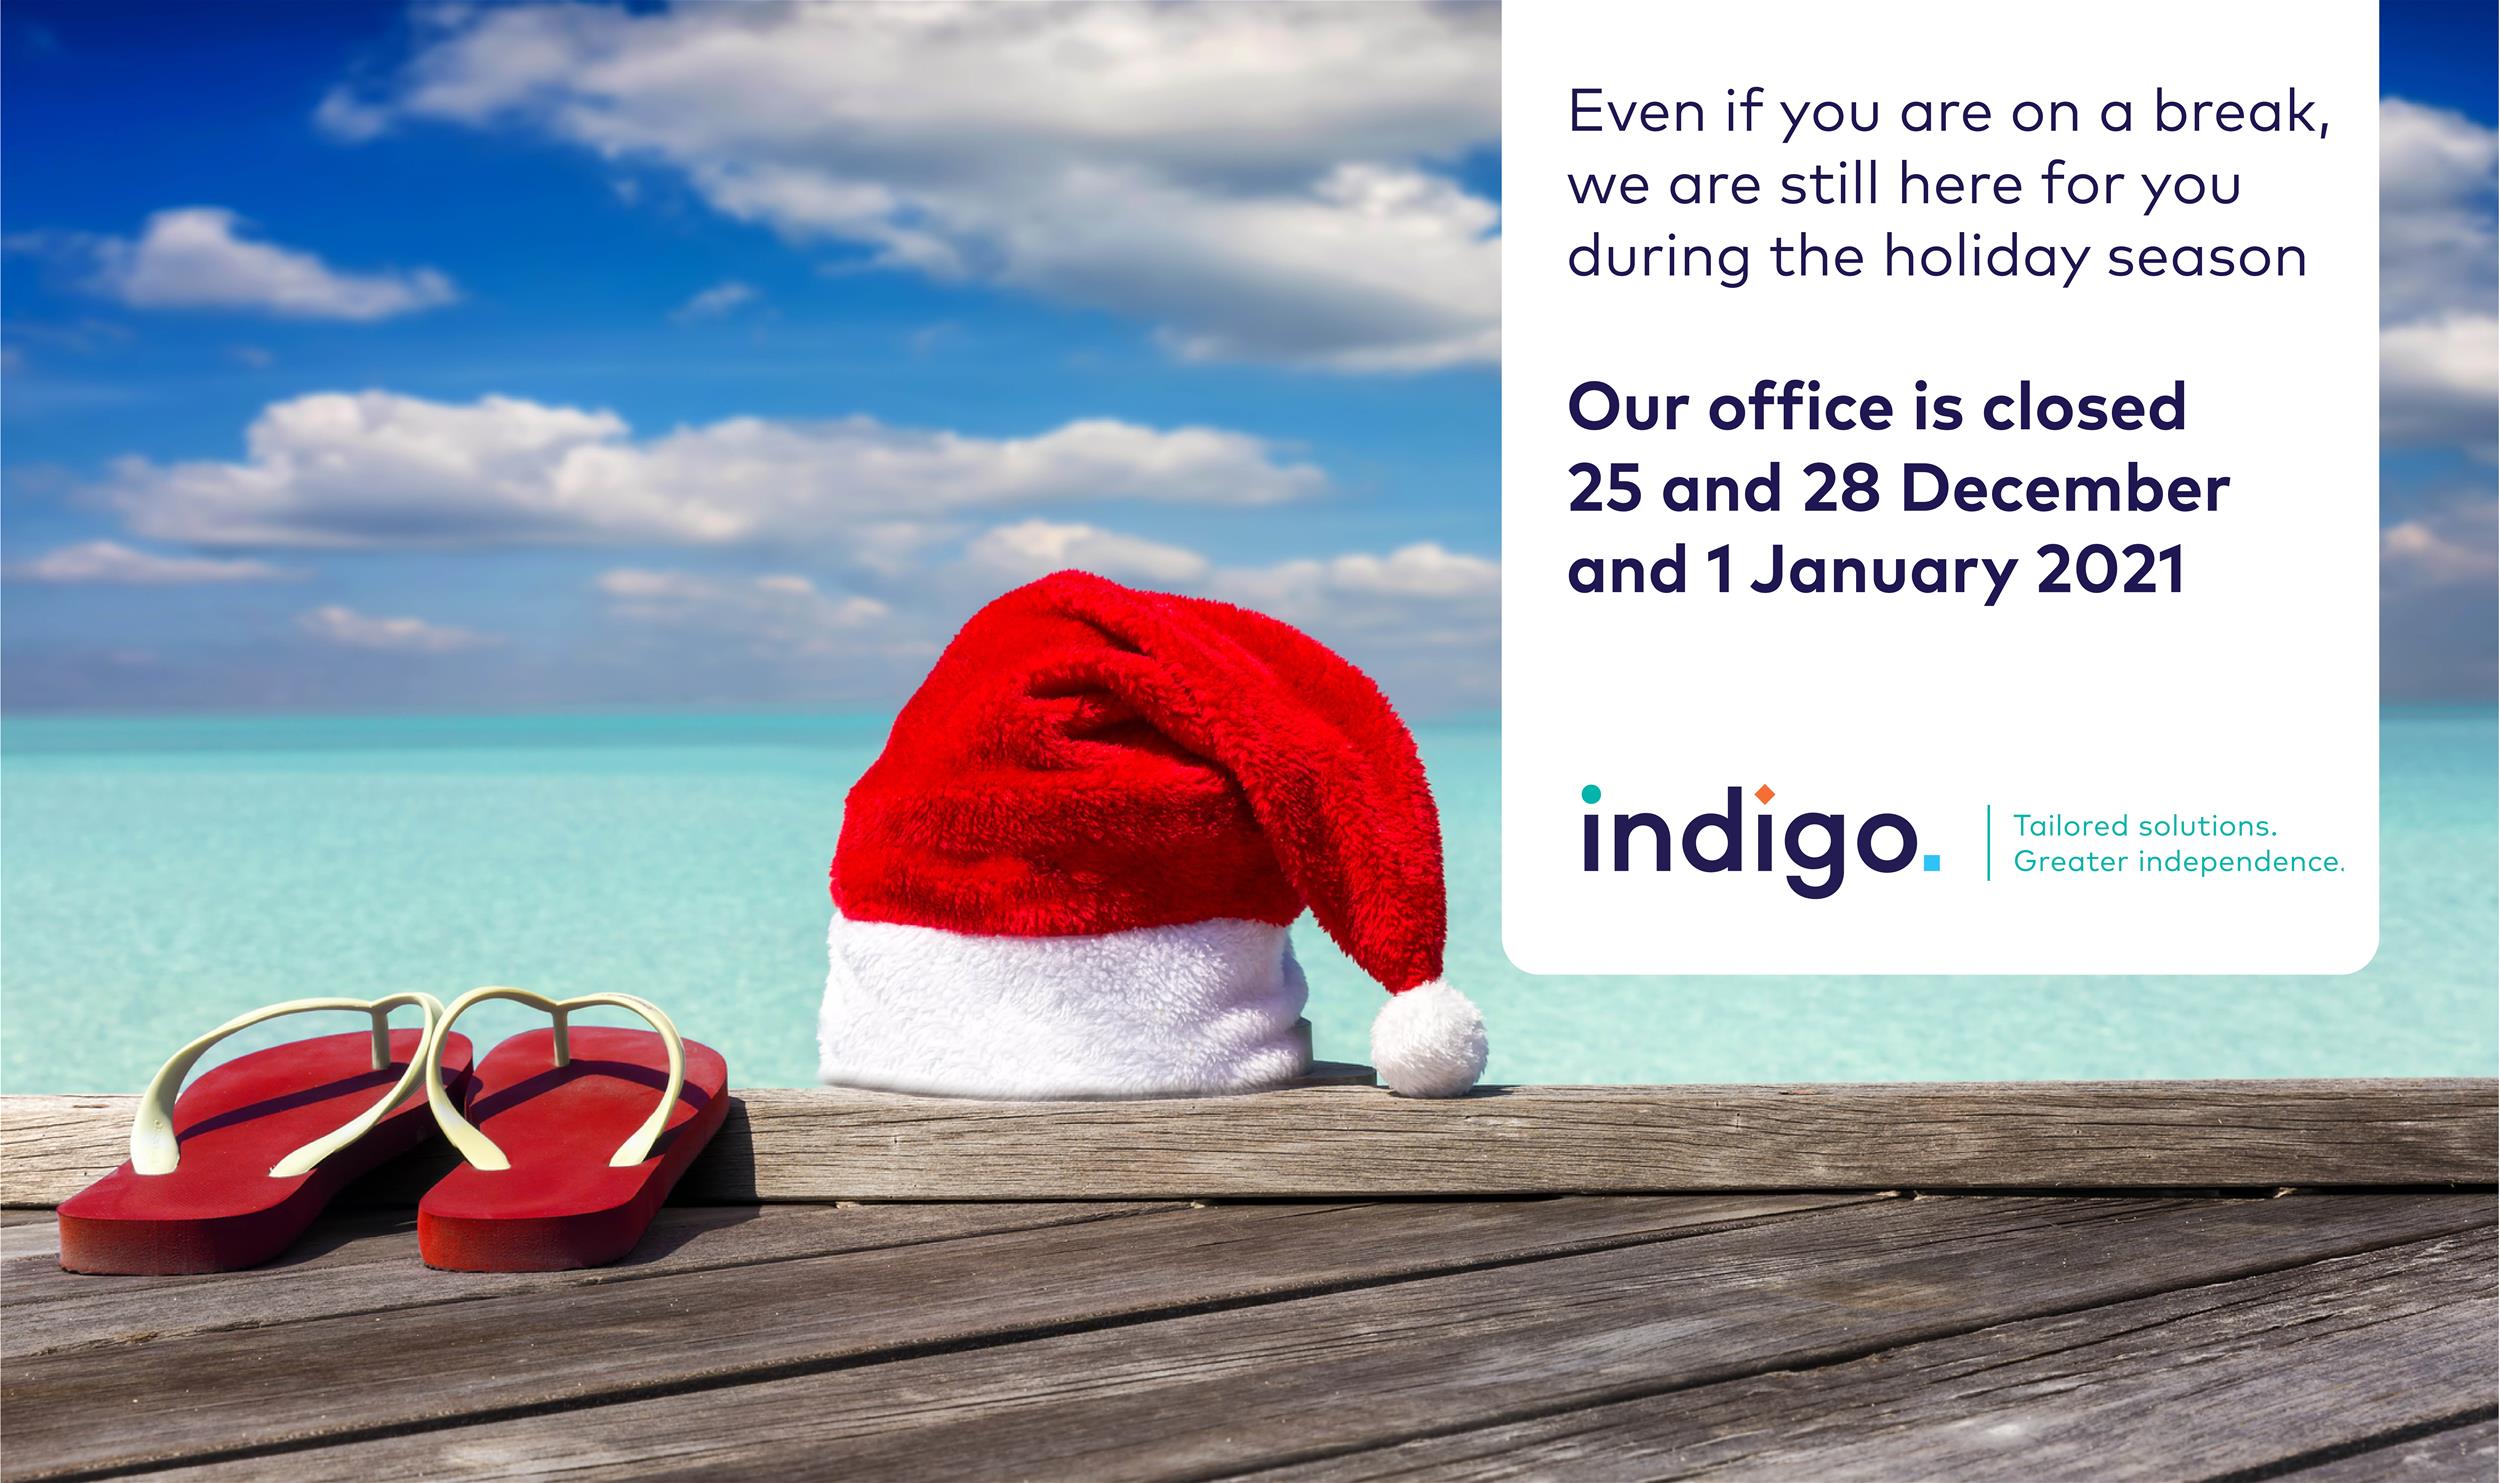 Indigo logo and text on ocean background with jetty, Santa hat and thongs